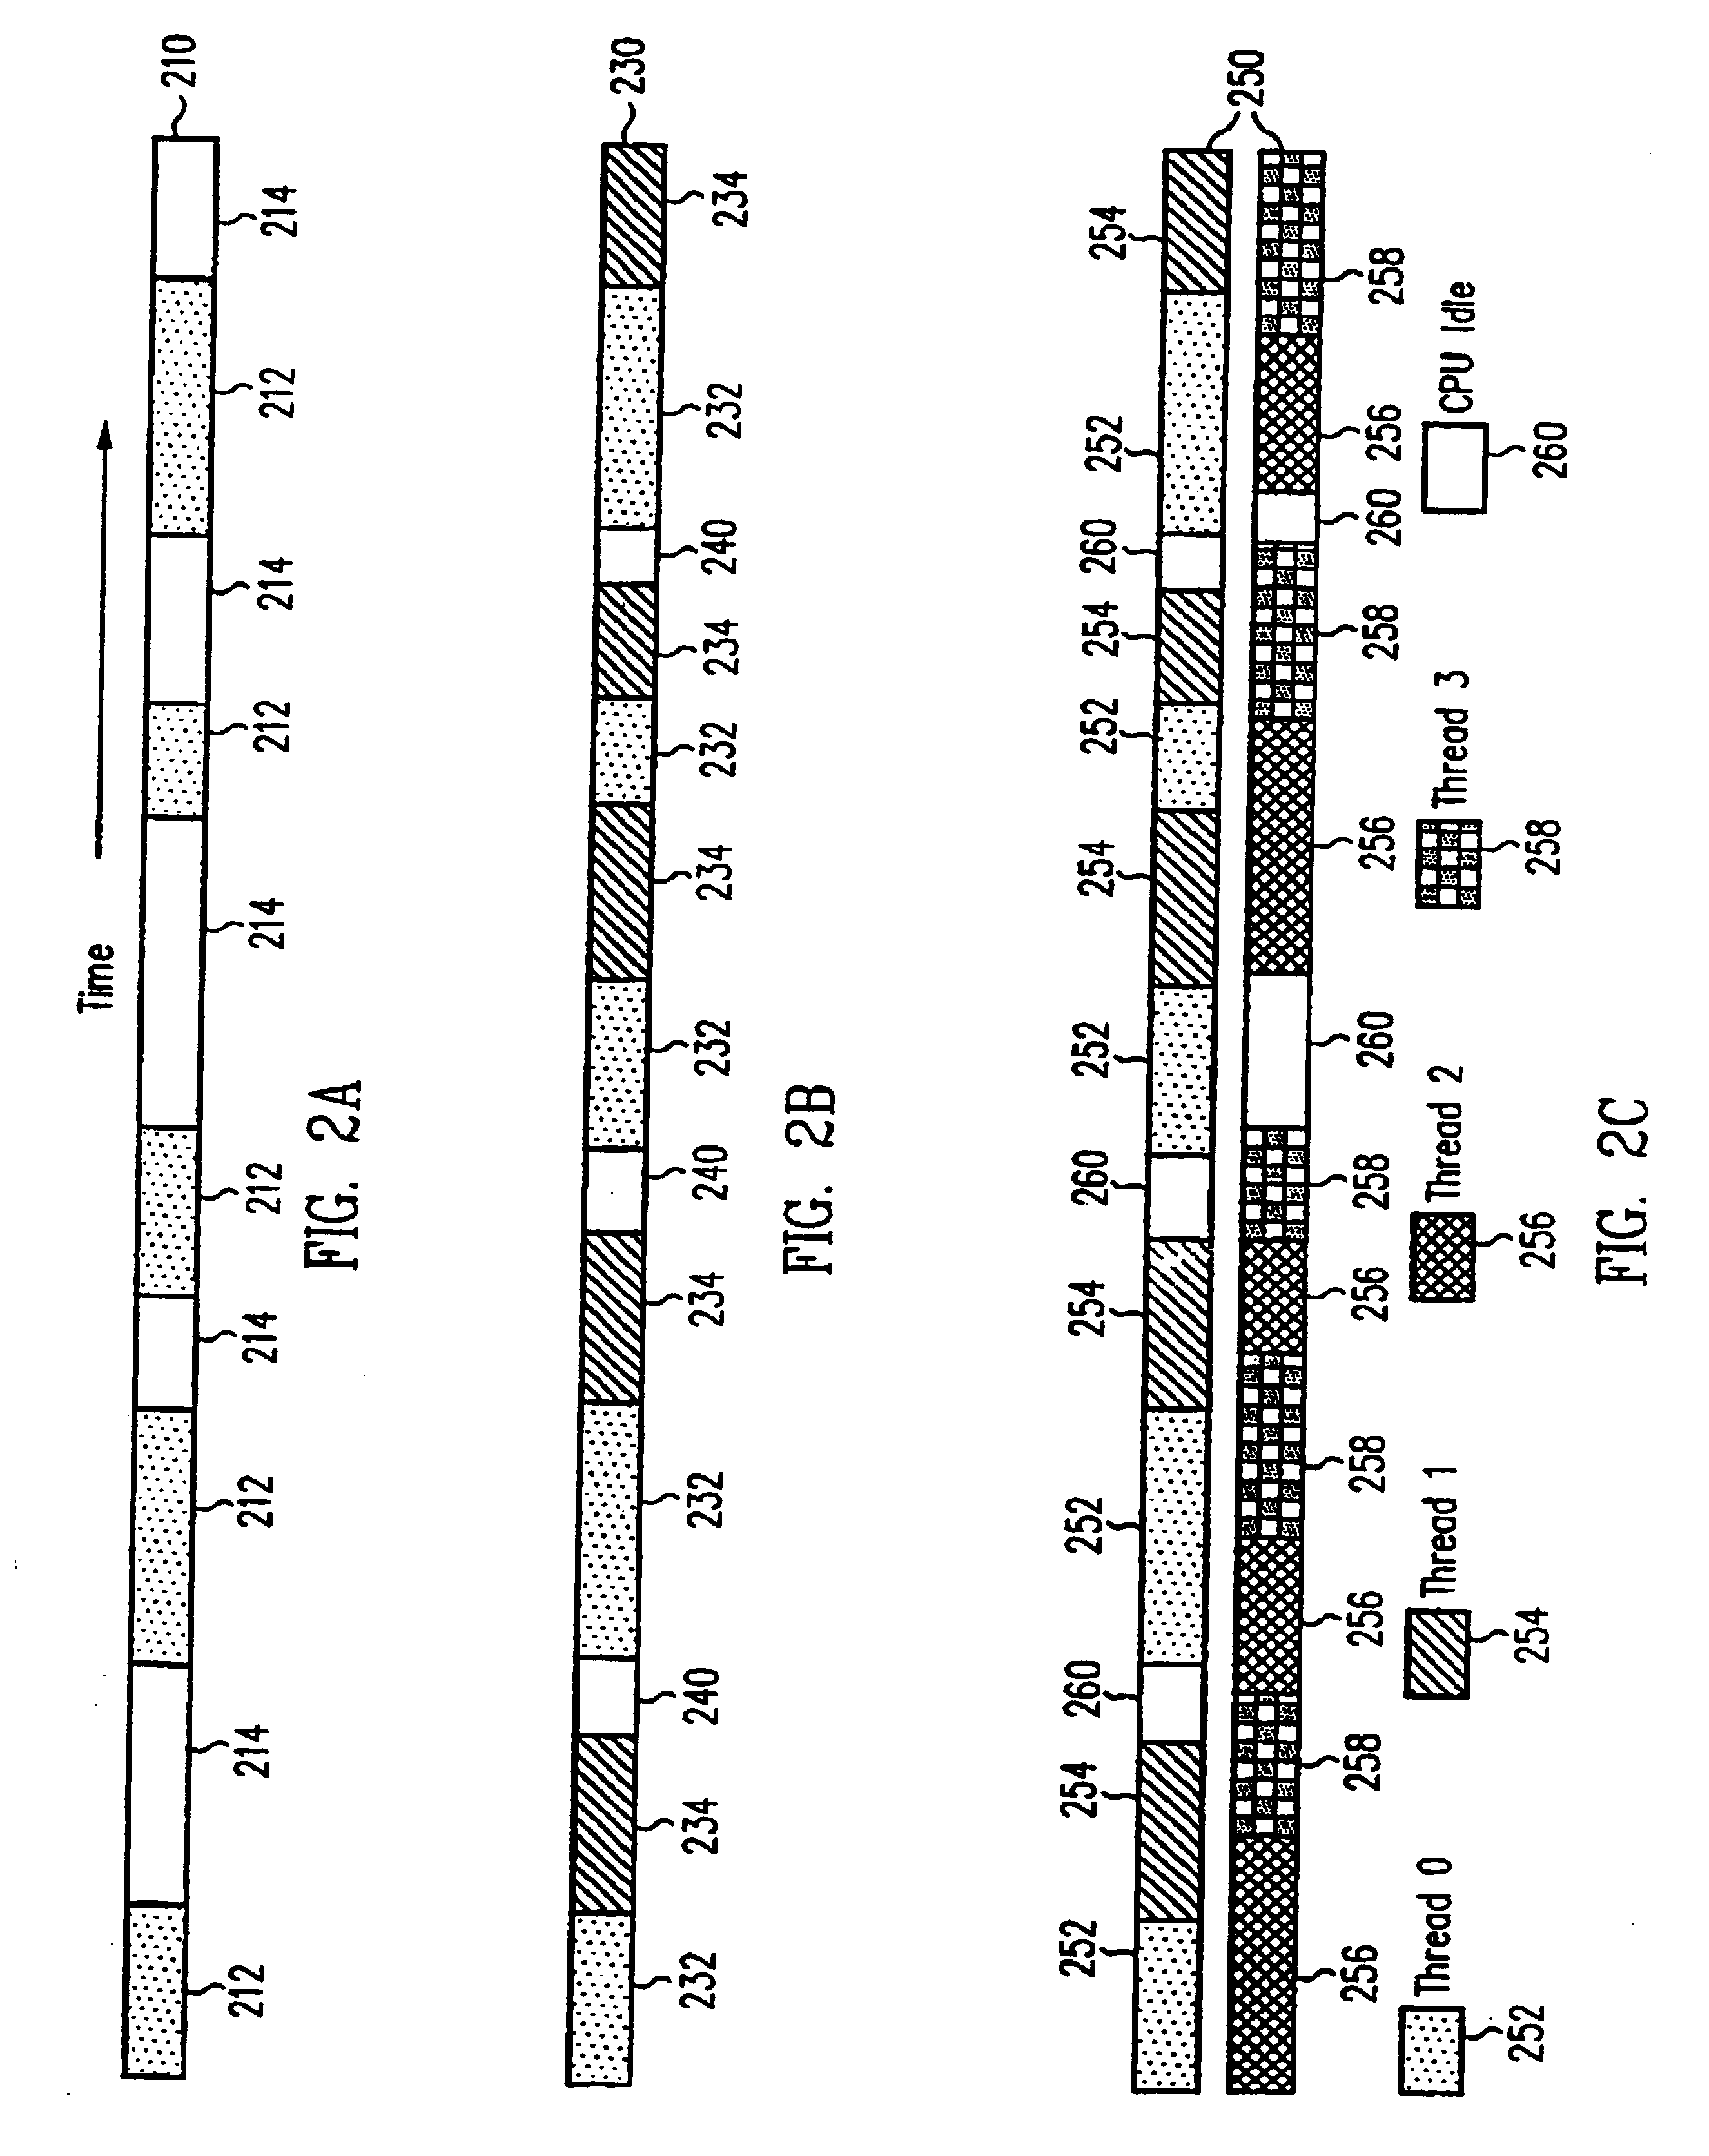 Processor with multiple-thread, vertically-threaded pipeline